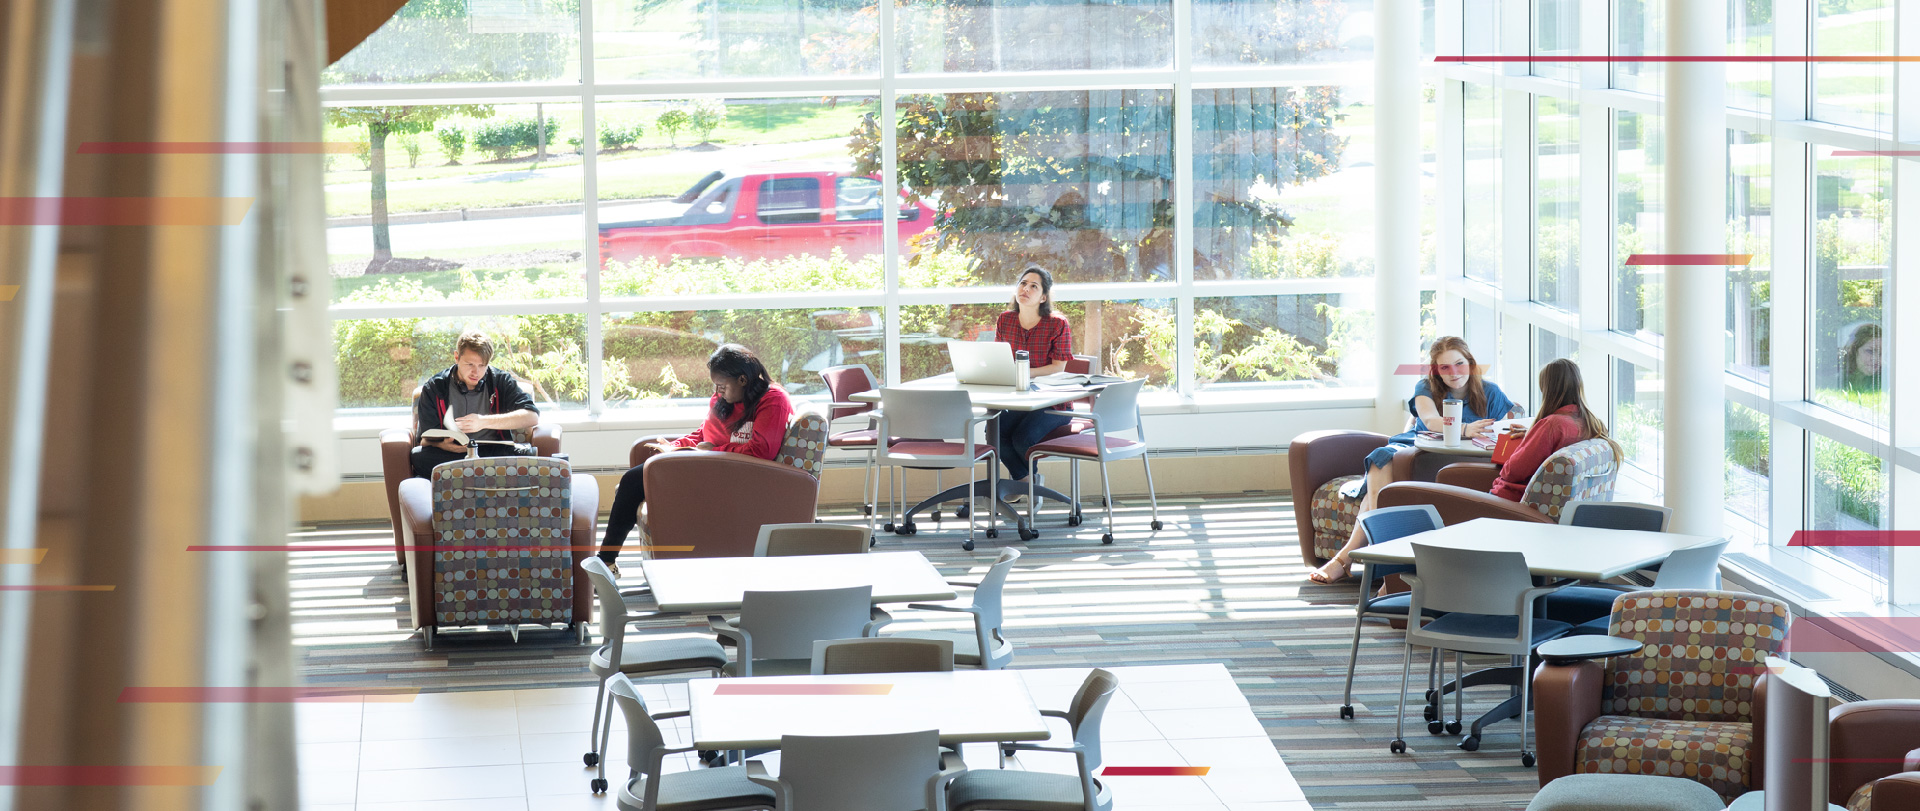 Students working in a lounge at Ferris State University